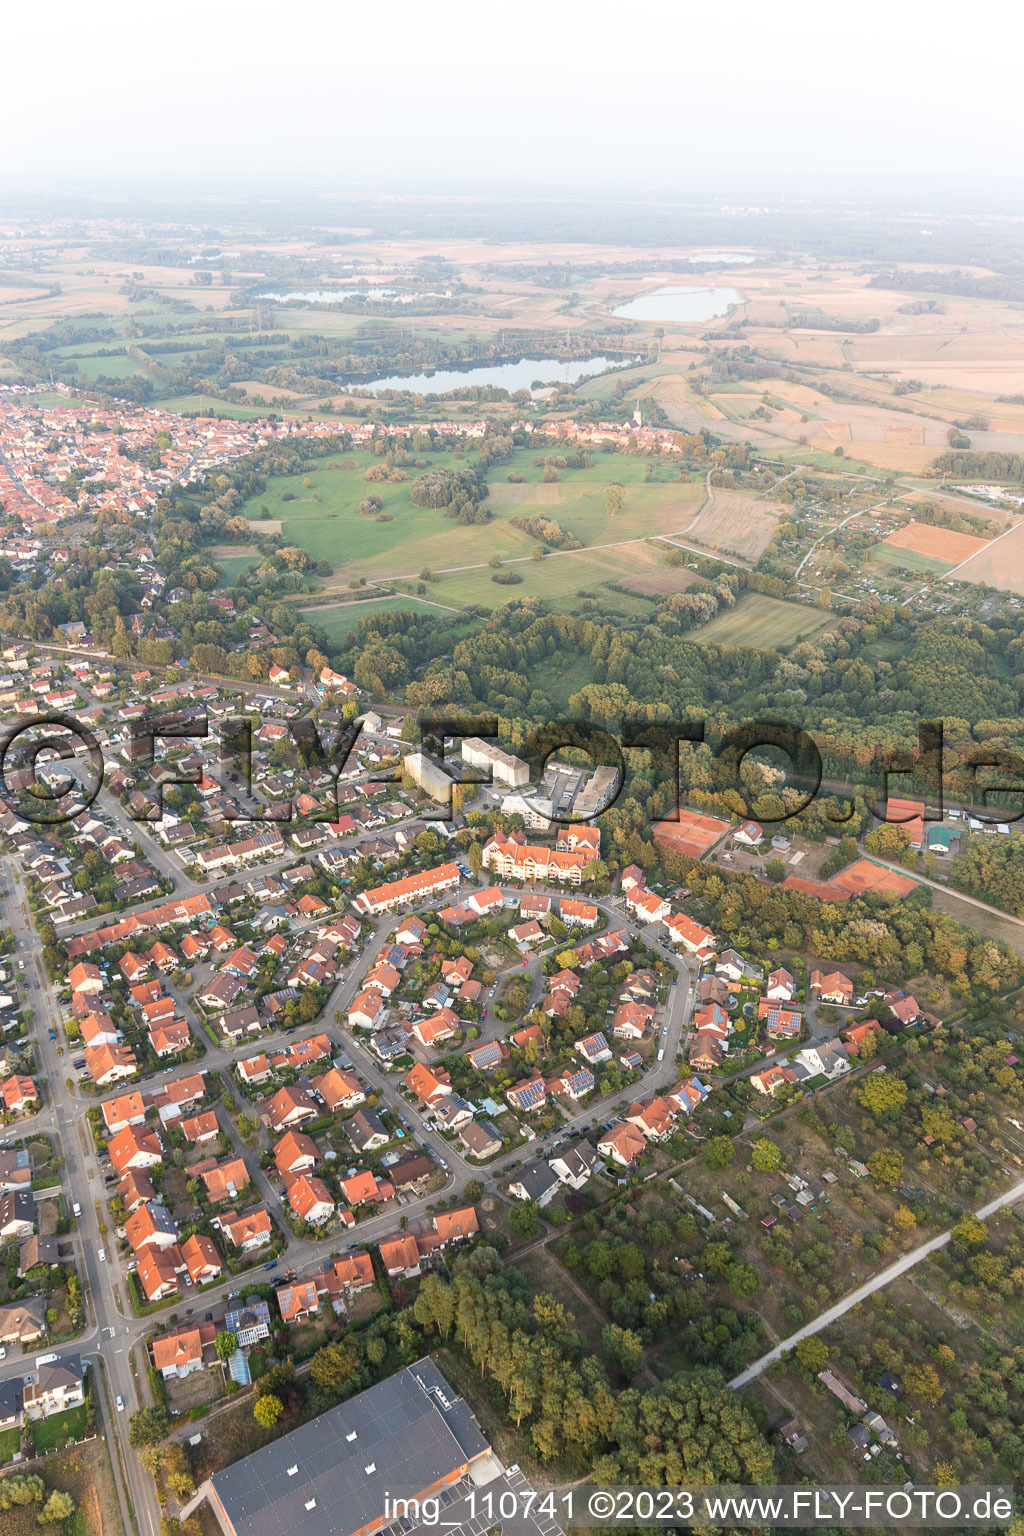 Jockgrim in the state Rhineland-Palatinate, Germany from above